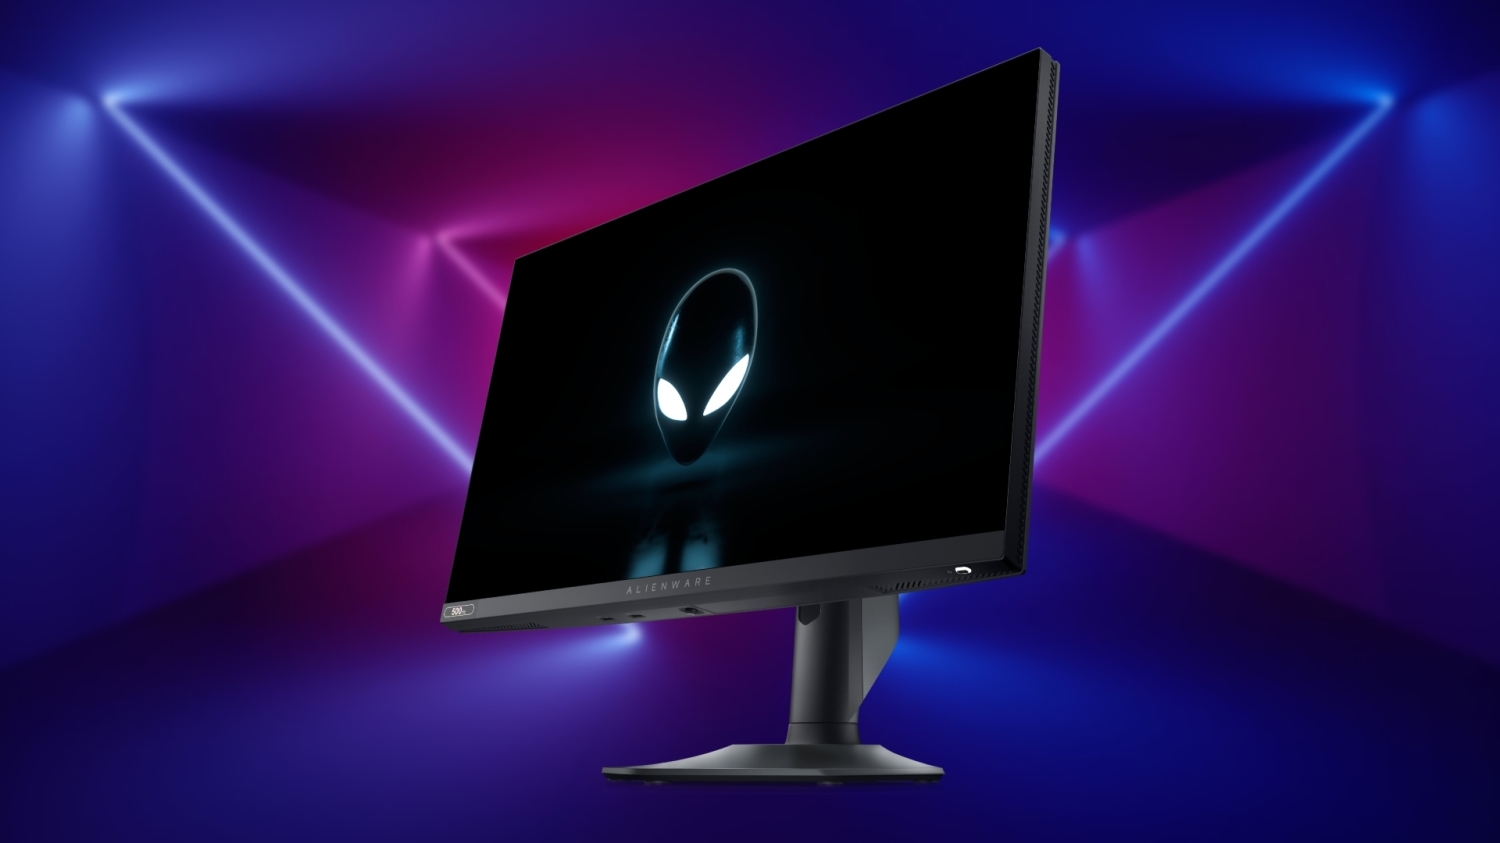 TweakTown Enlarged Image - The new Alienware AW2524HF Gaming Monitor features a 500 Hz fat IPS panel, image credit: Alienware.